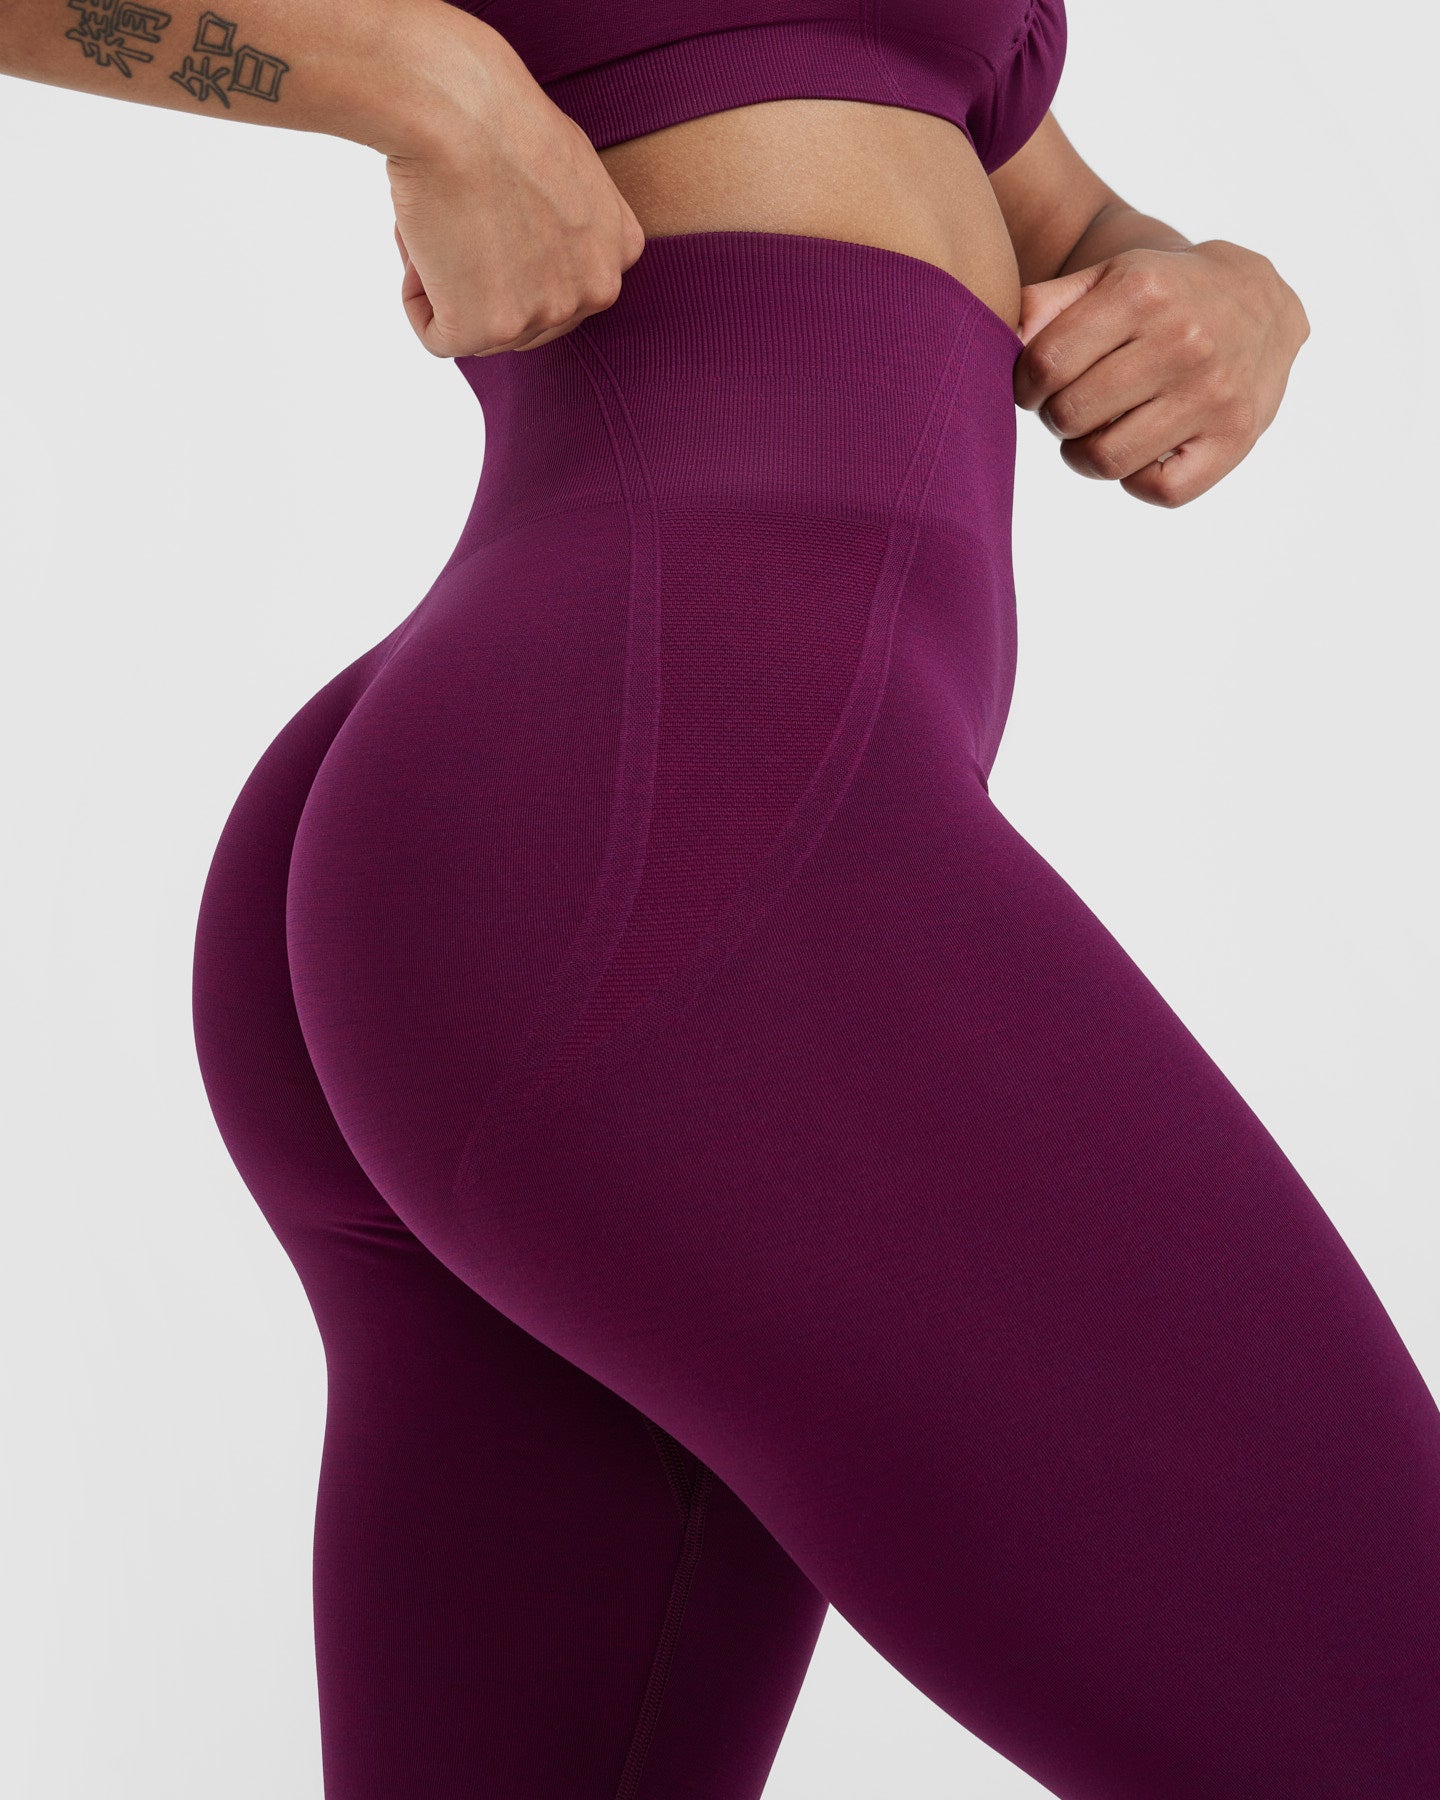 Buy Transparent Insert Leggings at Strictly Influential